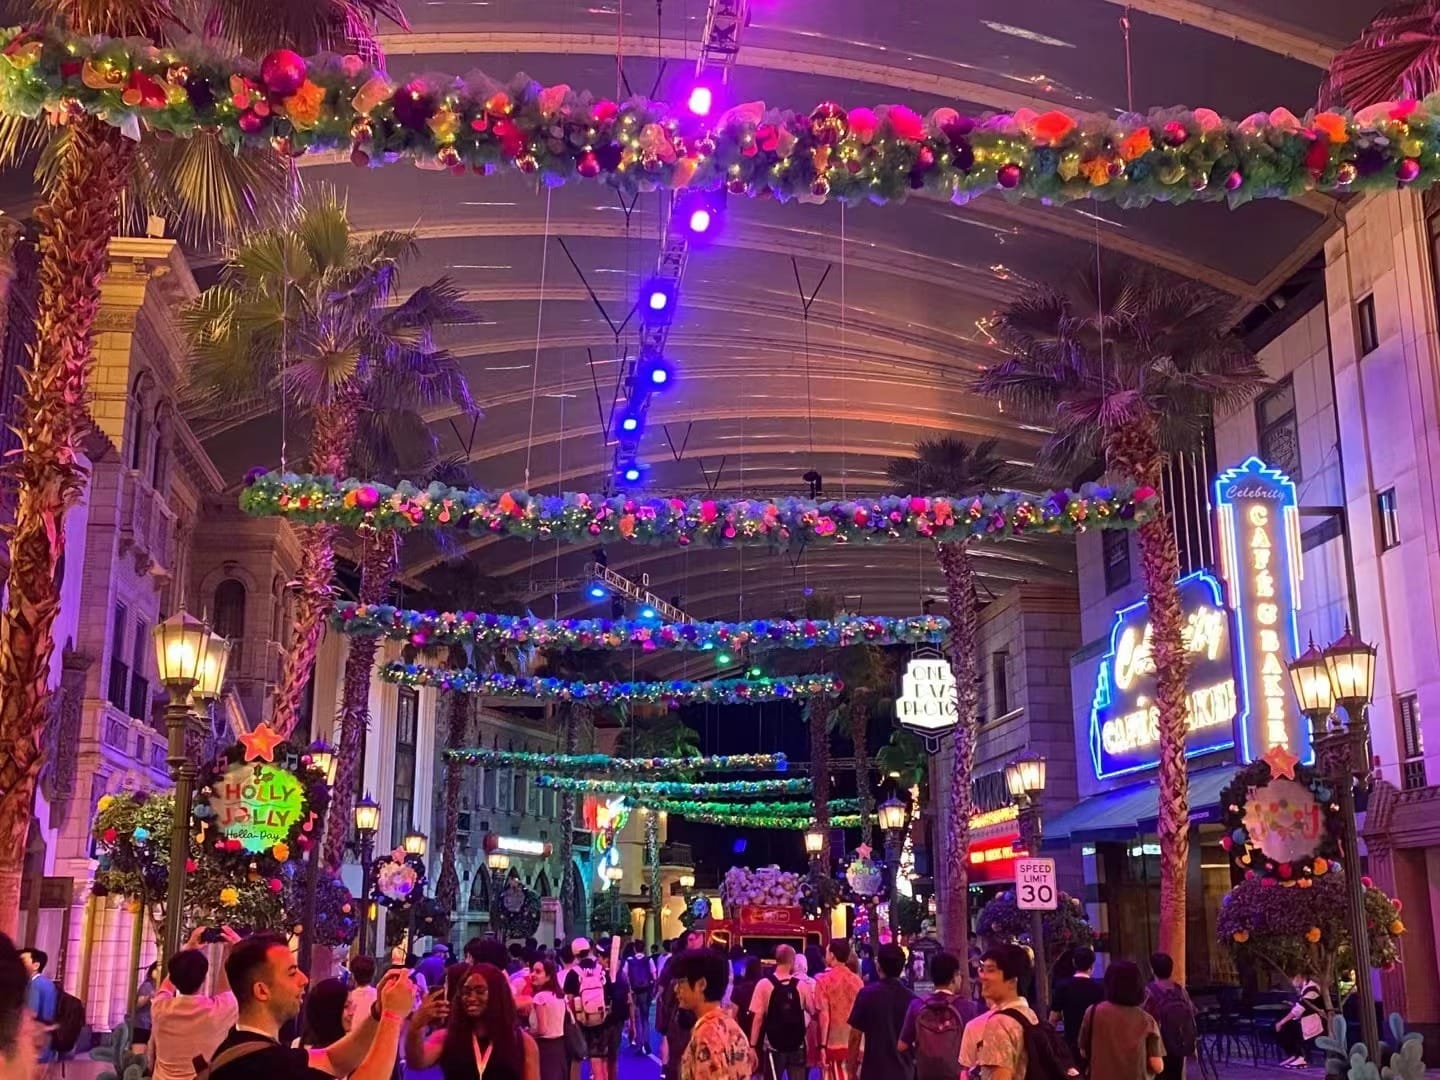 Nighttime pedestrian street bustling with people, adorned with neon lights and colorful floral decorations, with various visible signage